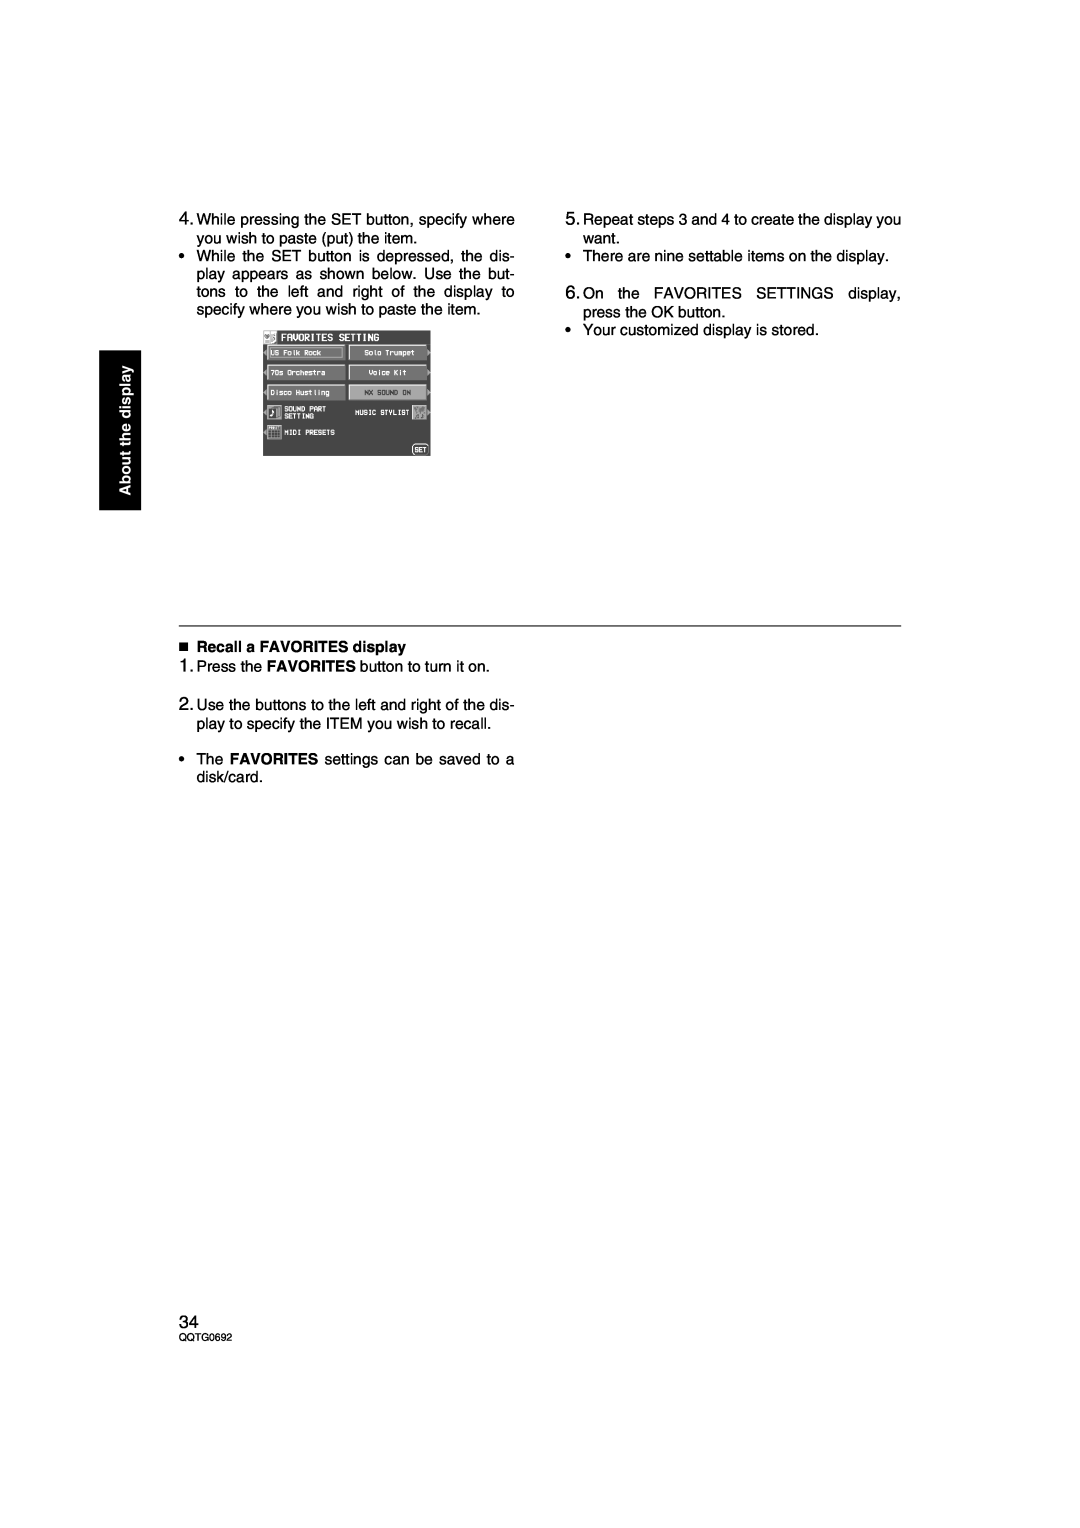 Panasonic SX-KN2600, SX-KN2400 manual Recall a FAVORITES display, About the display 